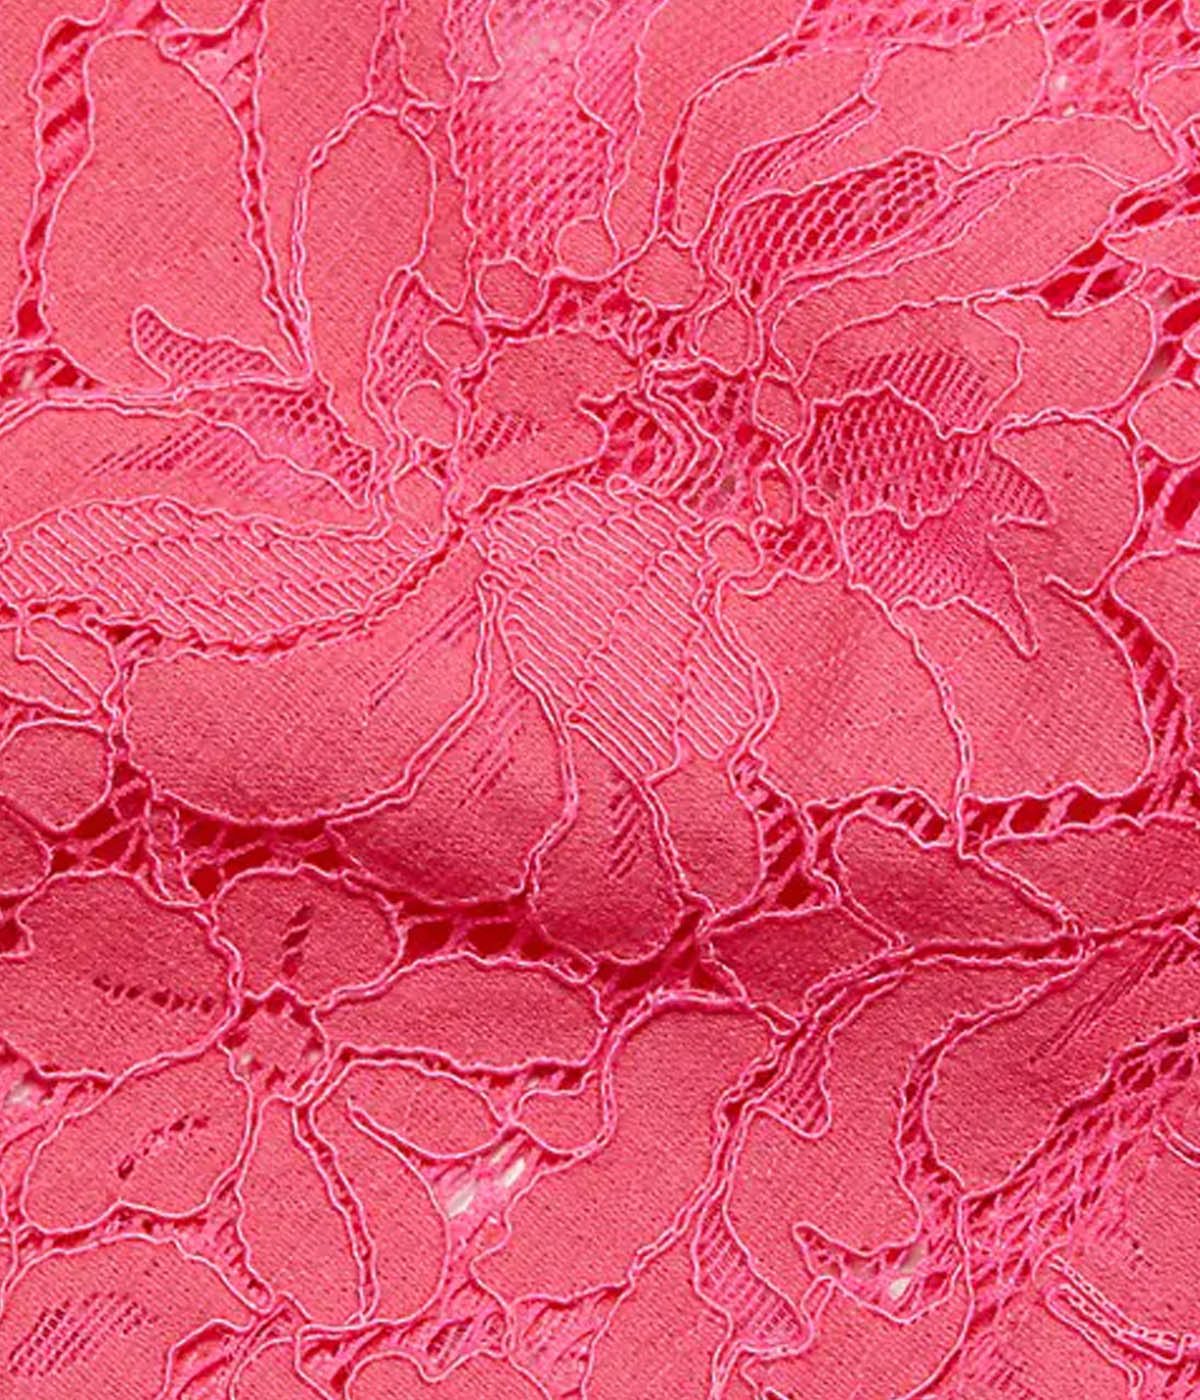 Jenica Lace Shirt in Rose